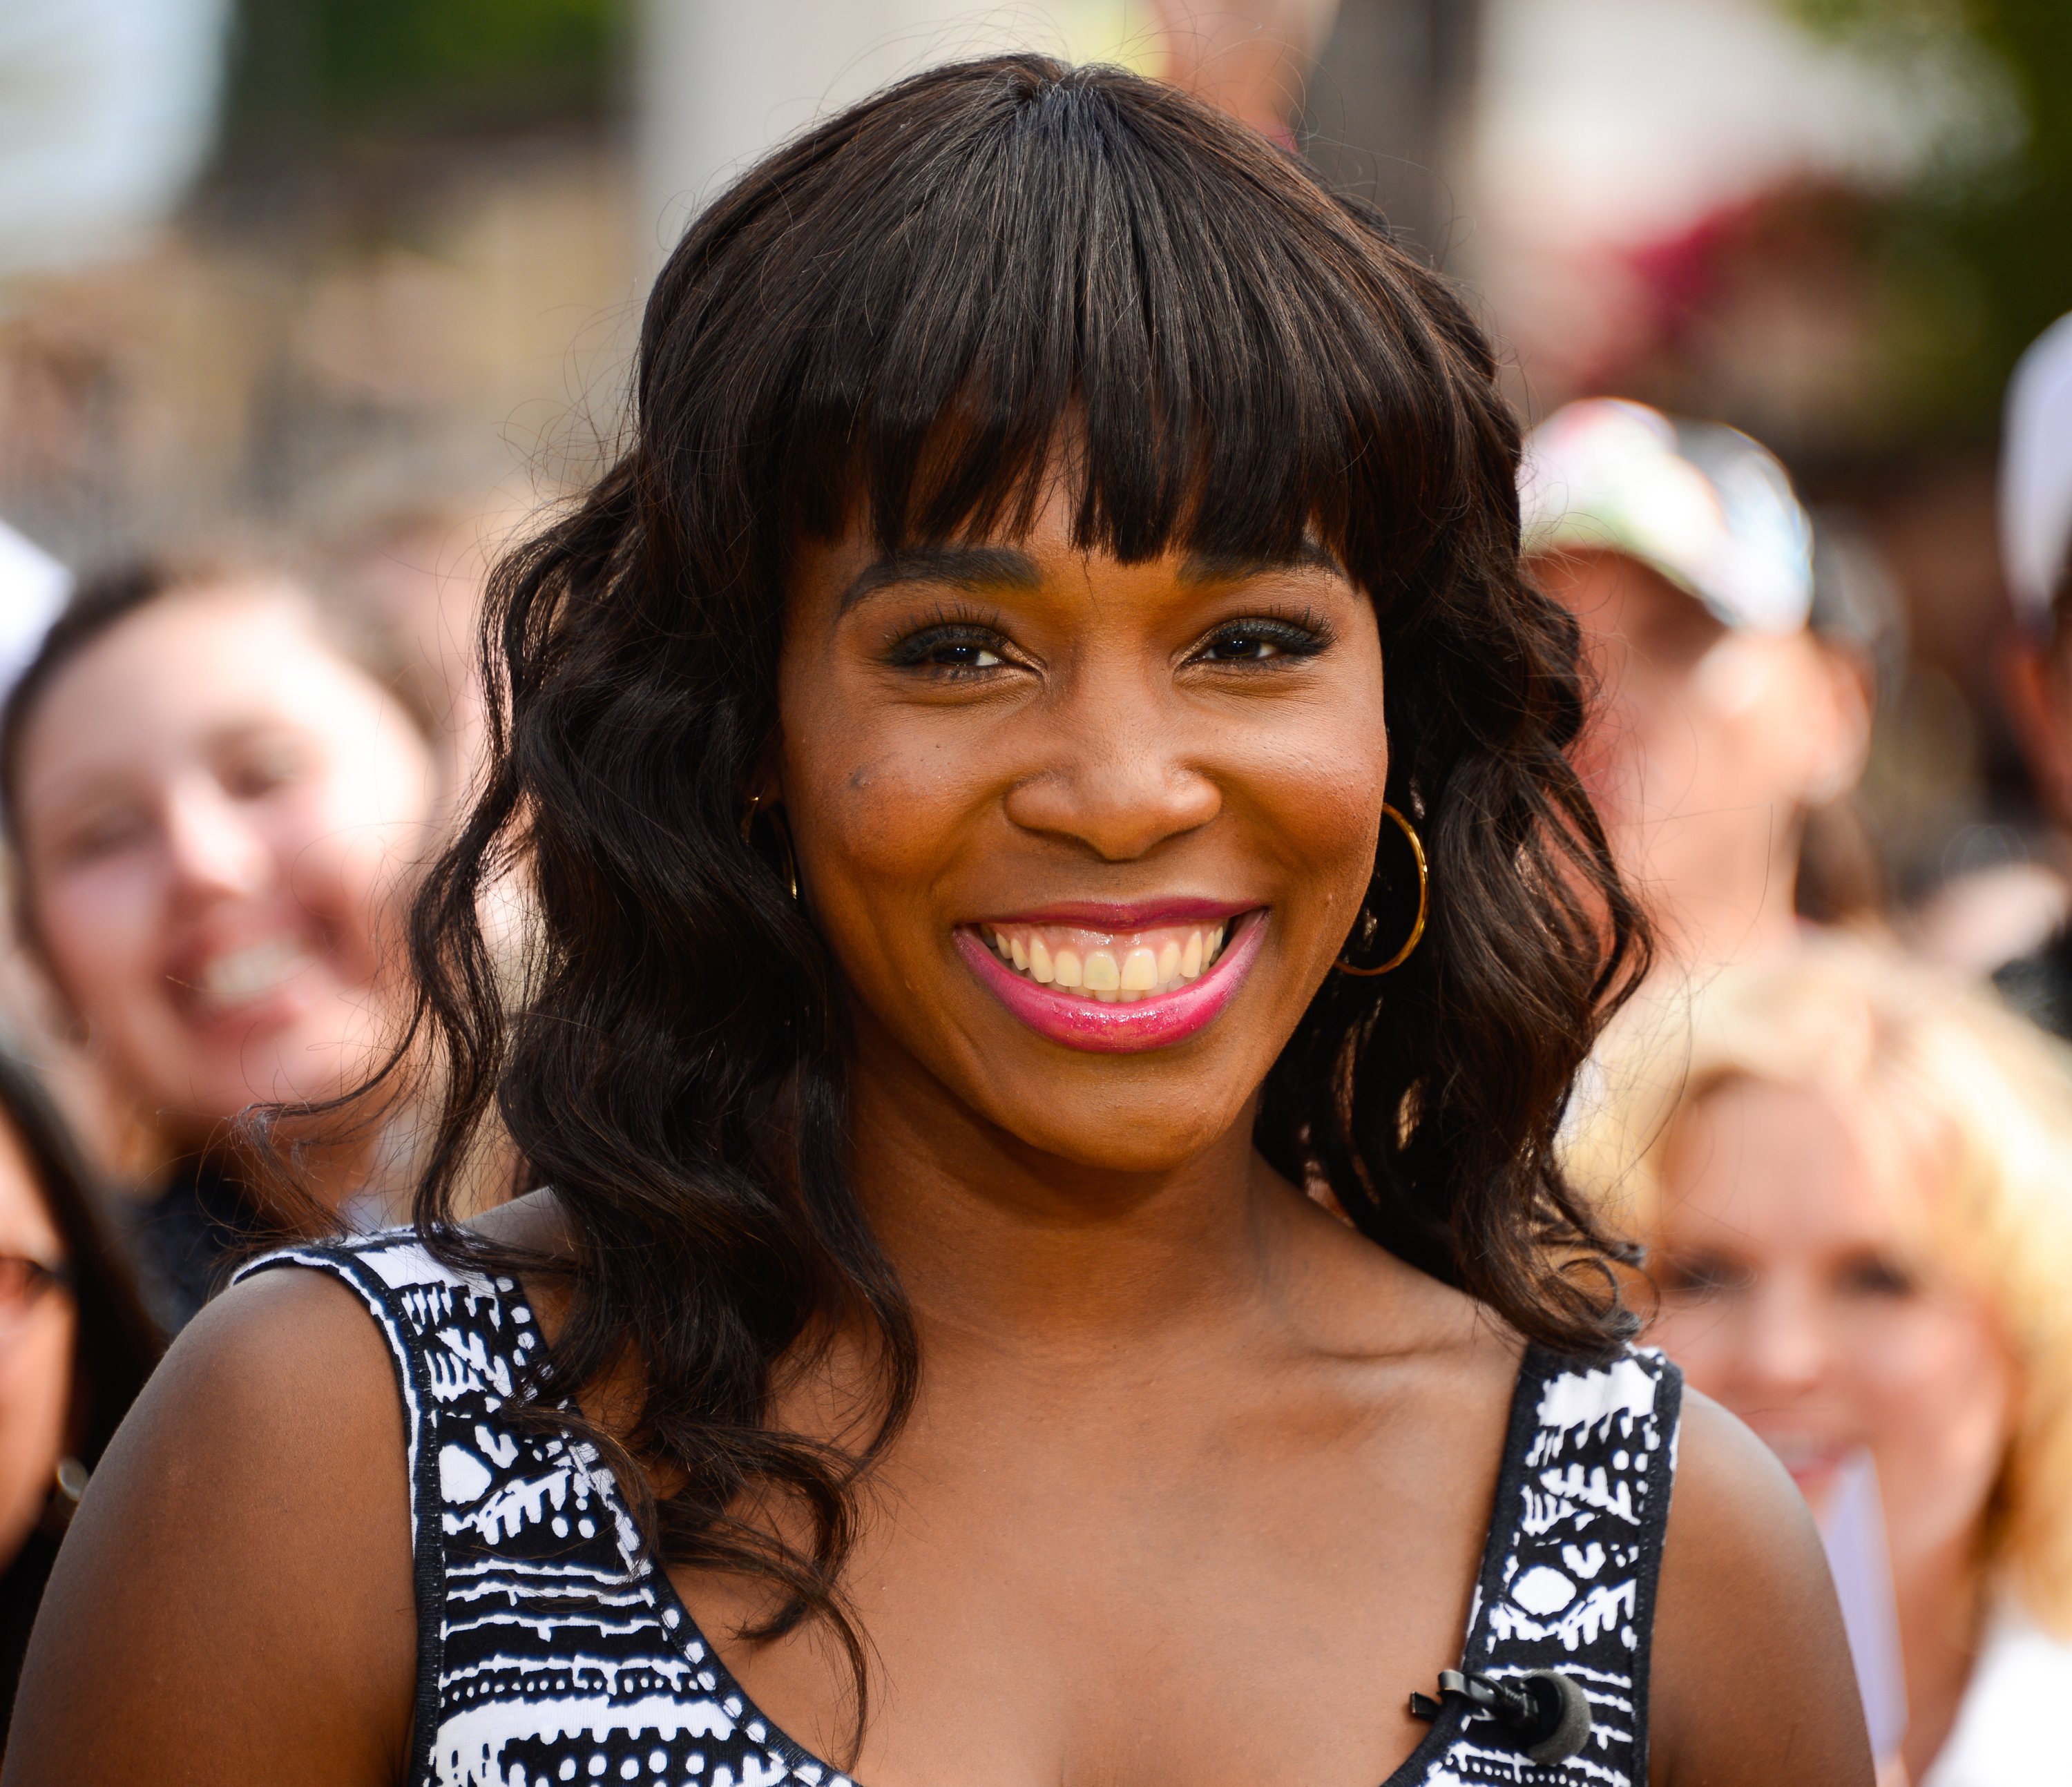 Venus Williams visits "Extra" at Universal Studios Hollywood on April 22, 2014, in Universal City, California. | Source: Getty Images.